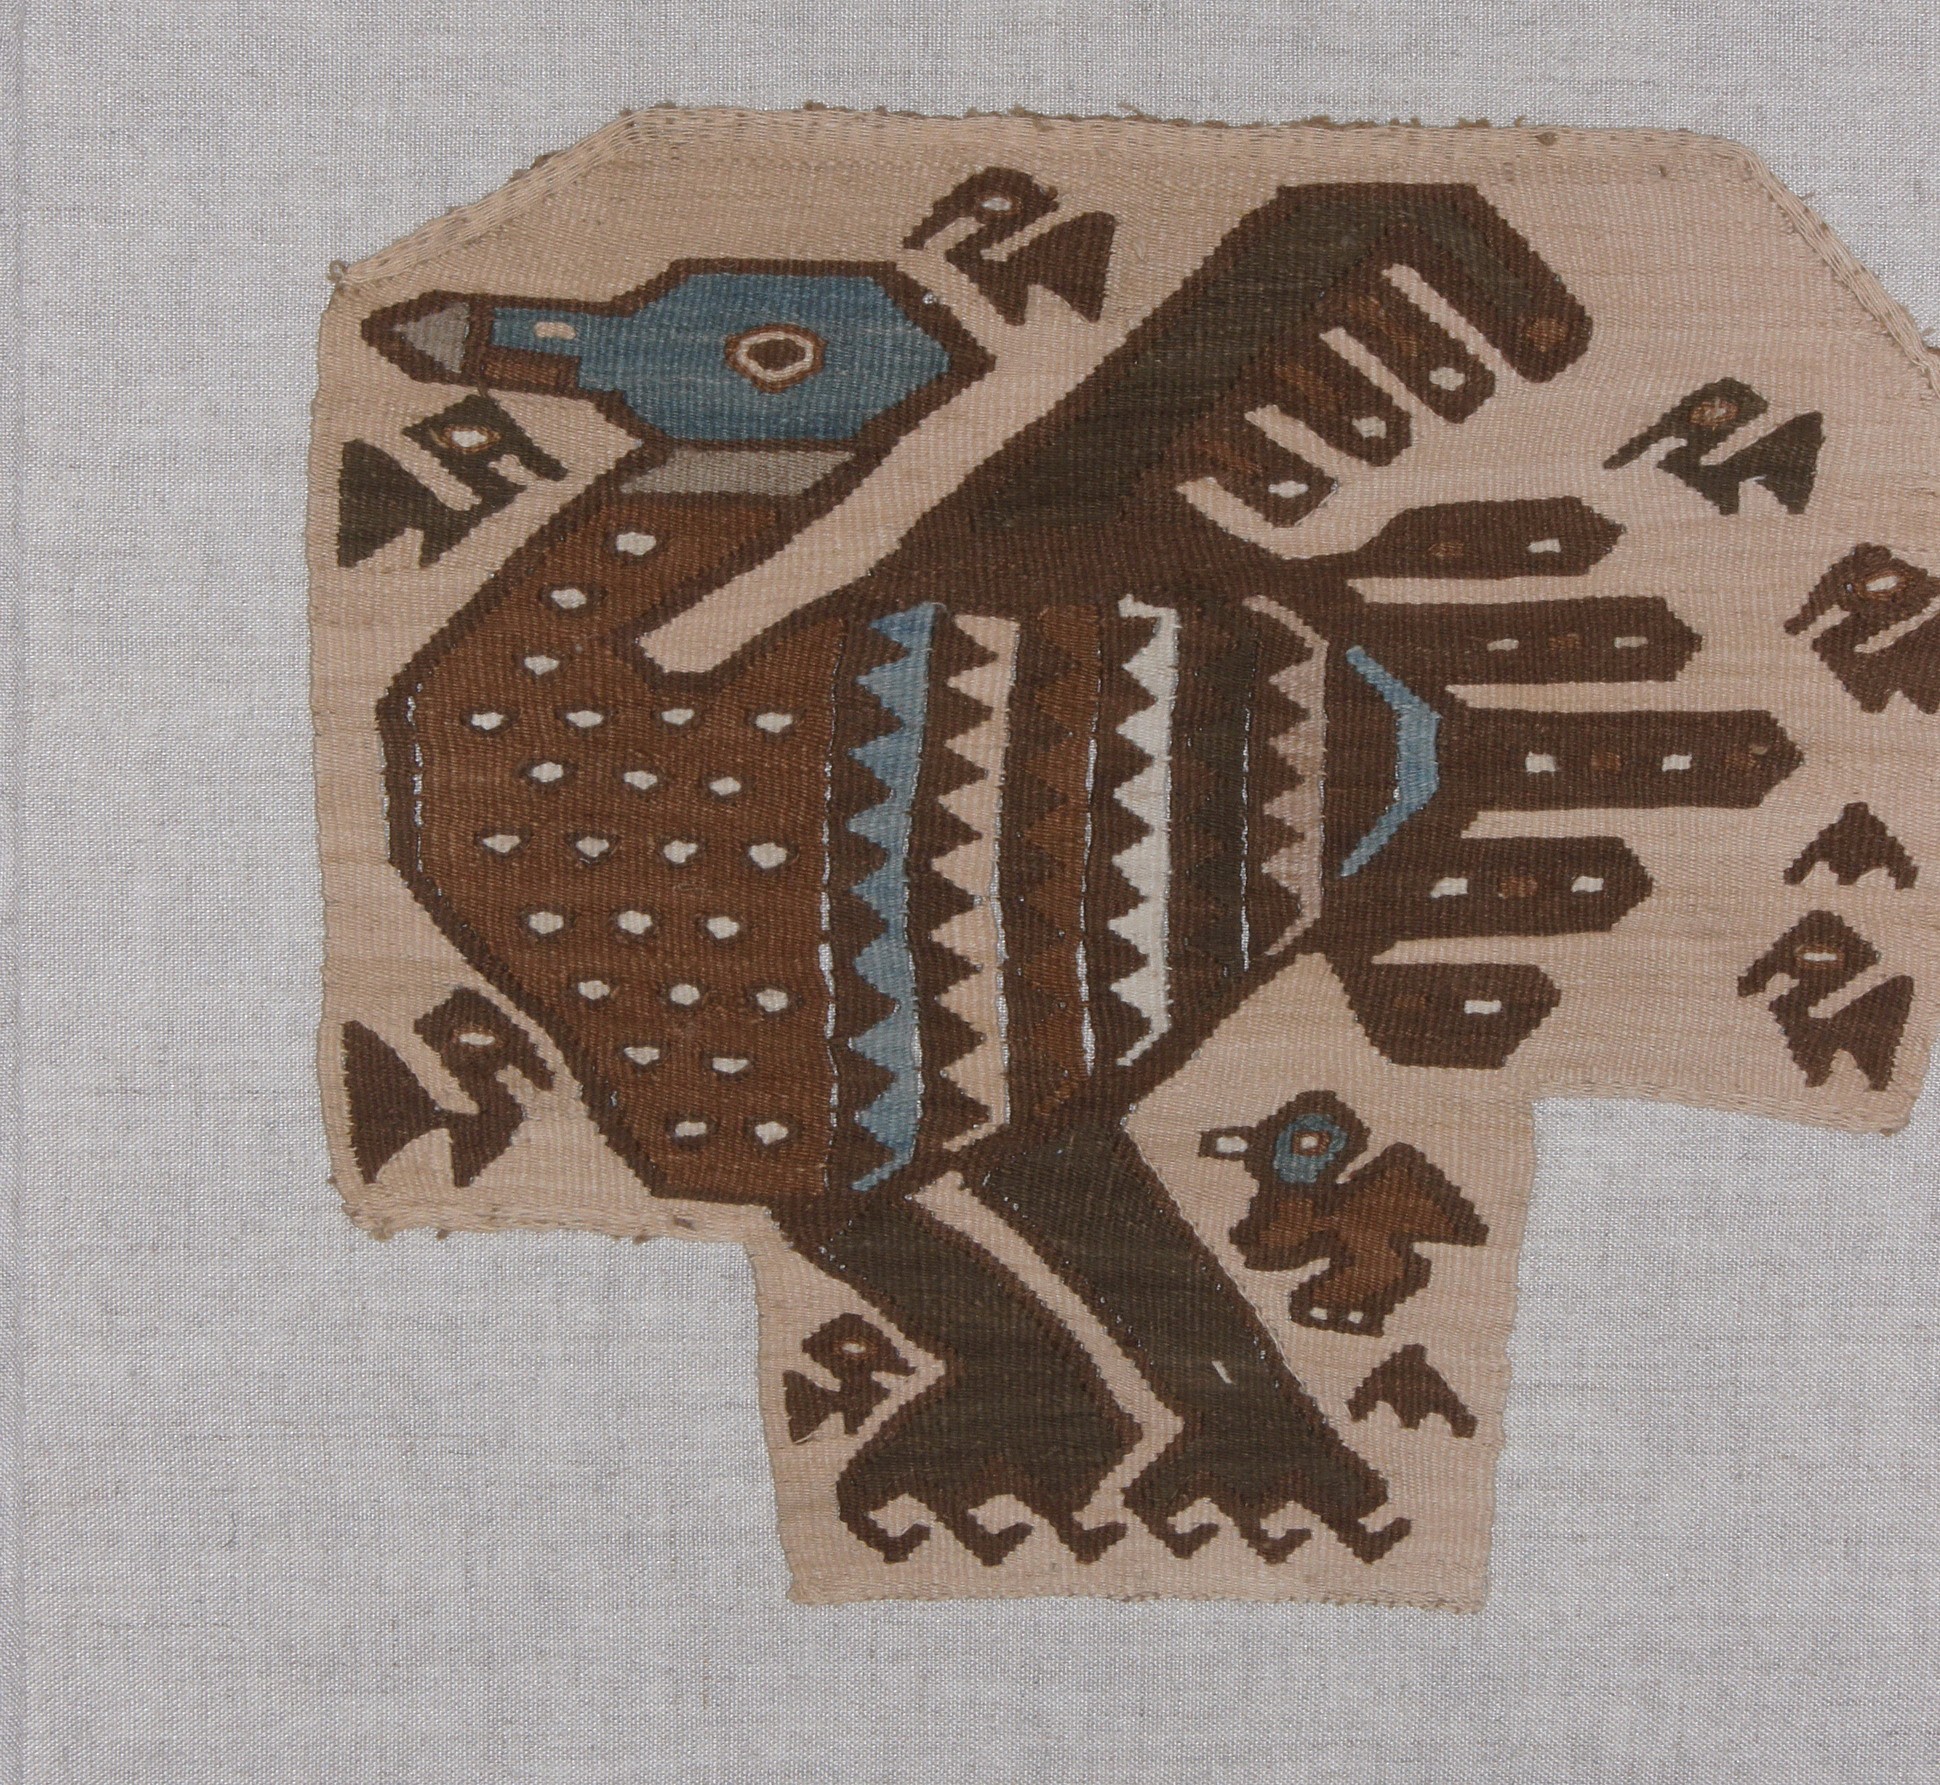 Peru, Pachacamac woven bird
This woven bird is brown, blue and white on a light brown ground, and has a smaller brown bird with a blue head behind it. There are a series of smaller, more stylized birds around the edge of the textile.  It was originally woven to be an emblem for tunic and was part of a large cache which was woven for tribute.  A similar bird is illustrated in TEXTILE ART OF PERU pg. 276.  This is a good example of a woven shaped  tapestry as it is not cut.
Media: Textile
Dimensions: Width 17" x Length 20" mounted / length 10 x width 9 in.
$7,500
93127